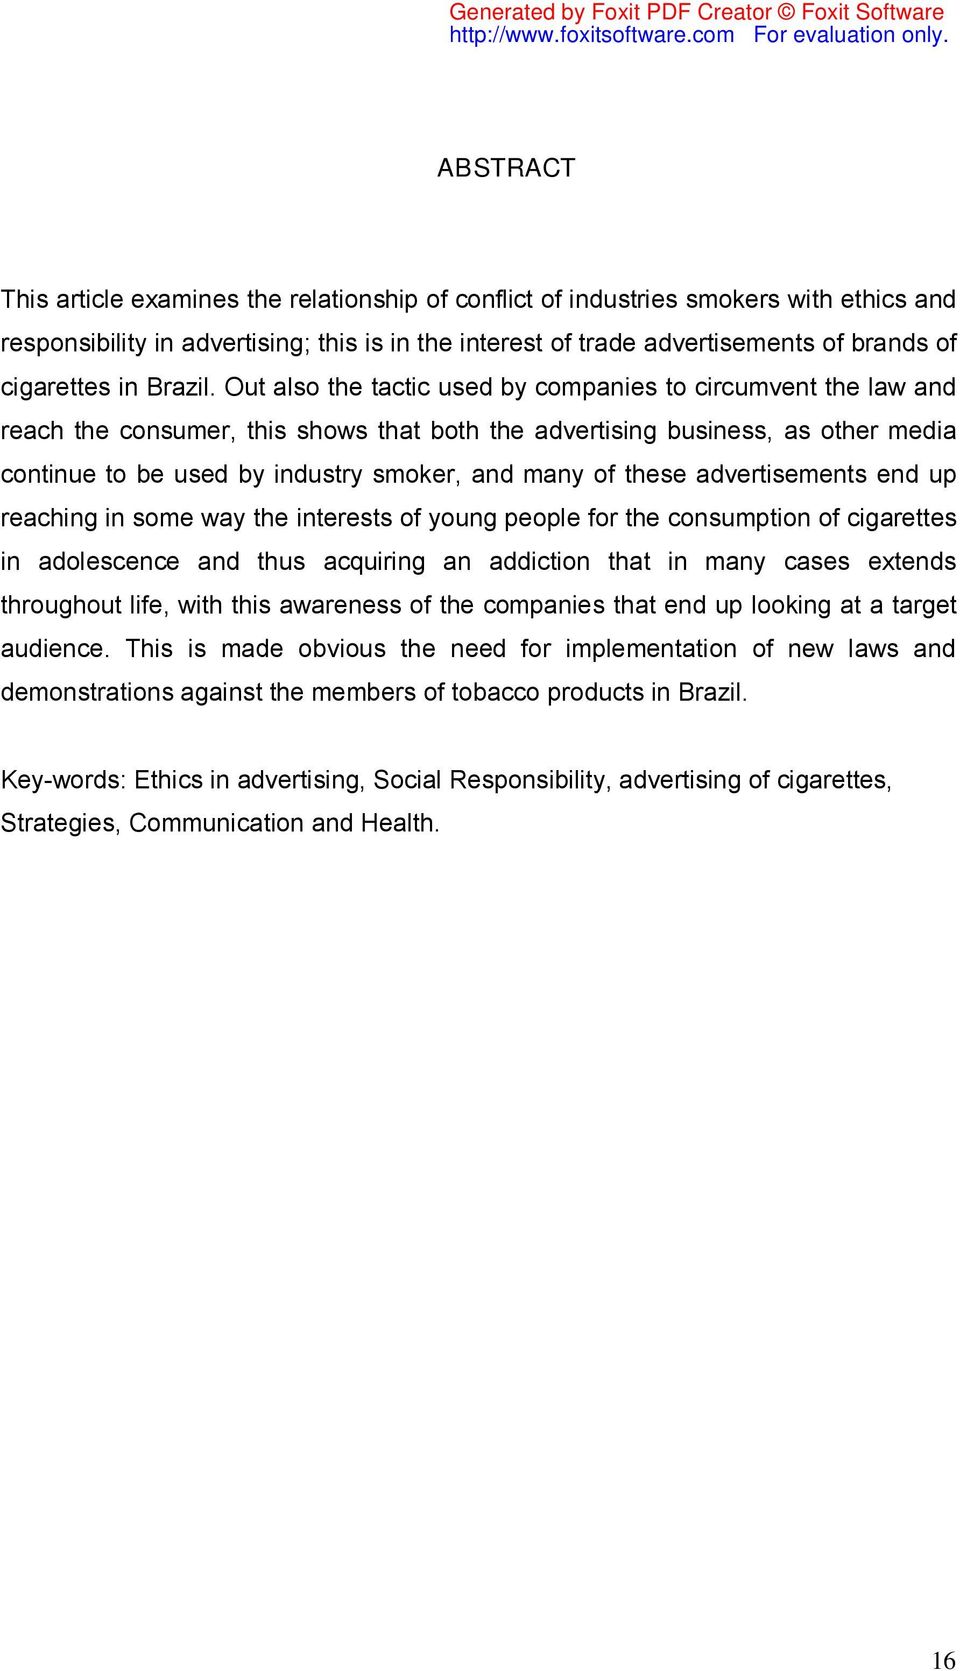 Out also the tactic used by companies to circumvent the law and reach the consumer, this shows that both the advertising business, as other media continue to be used by industry smoker, and many of